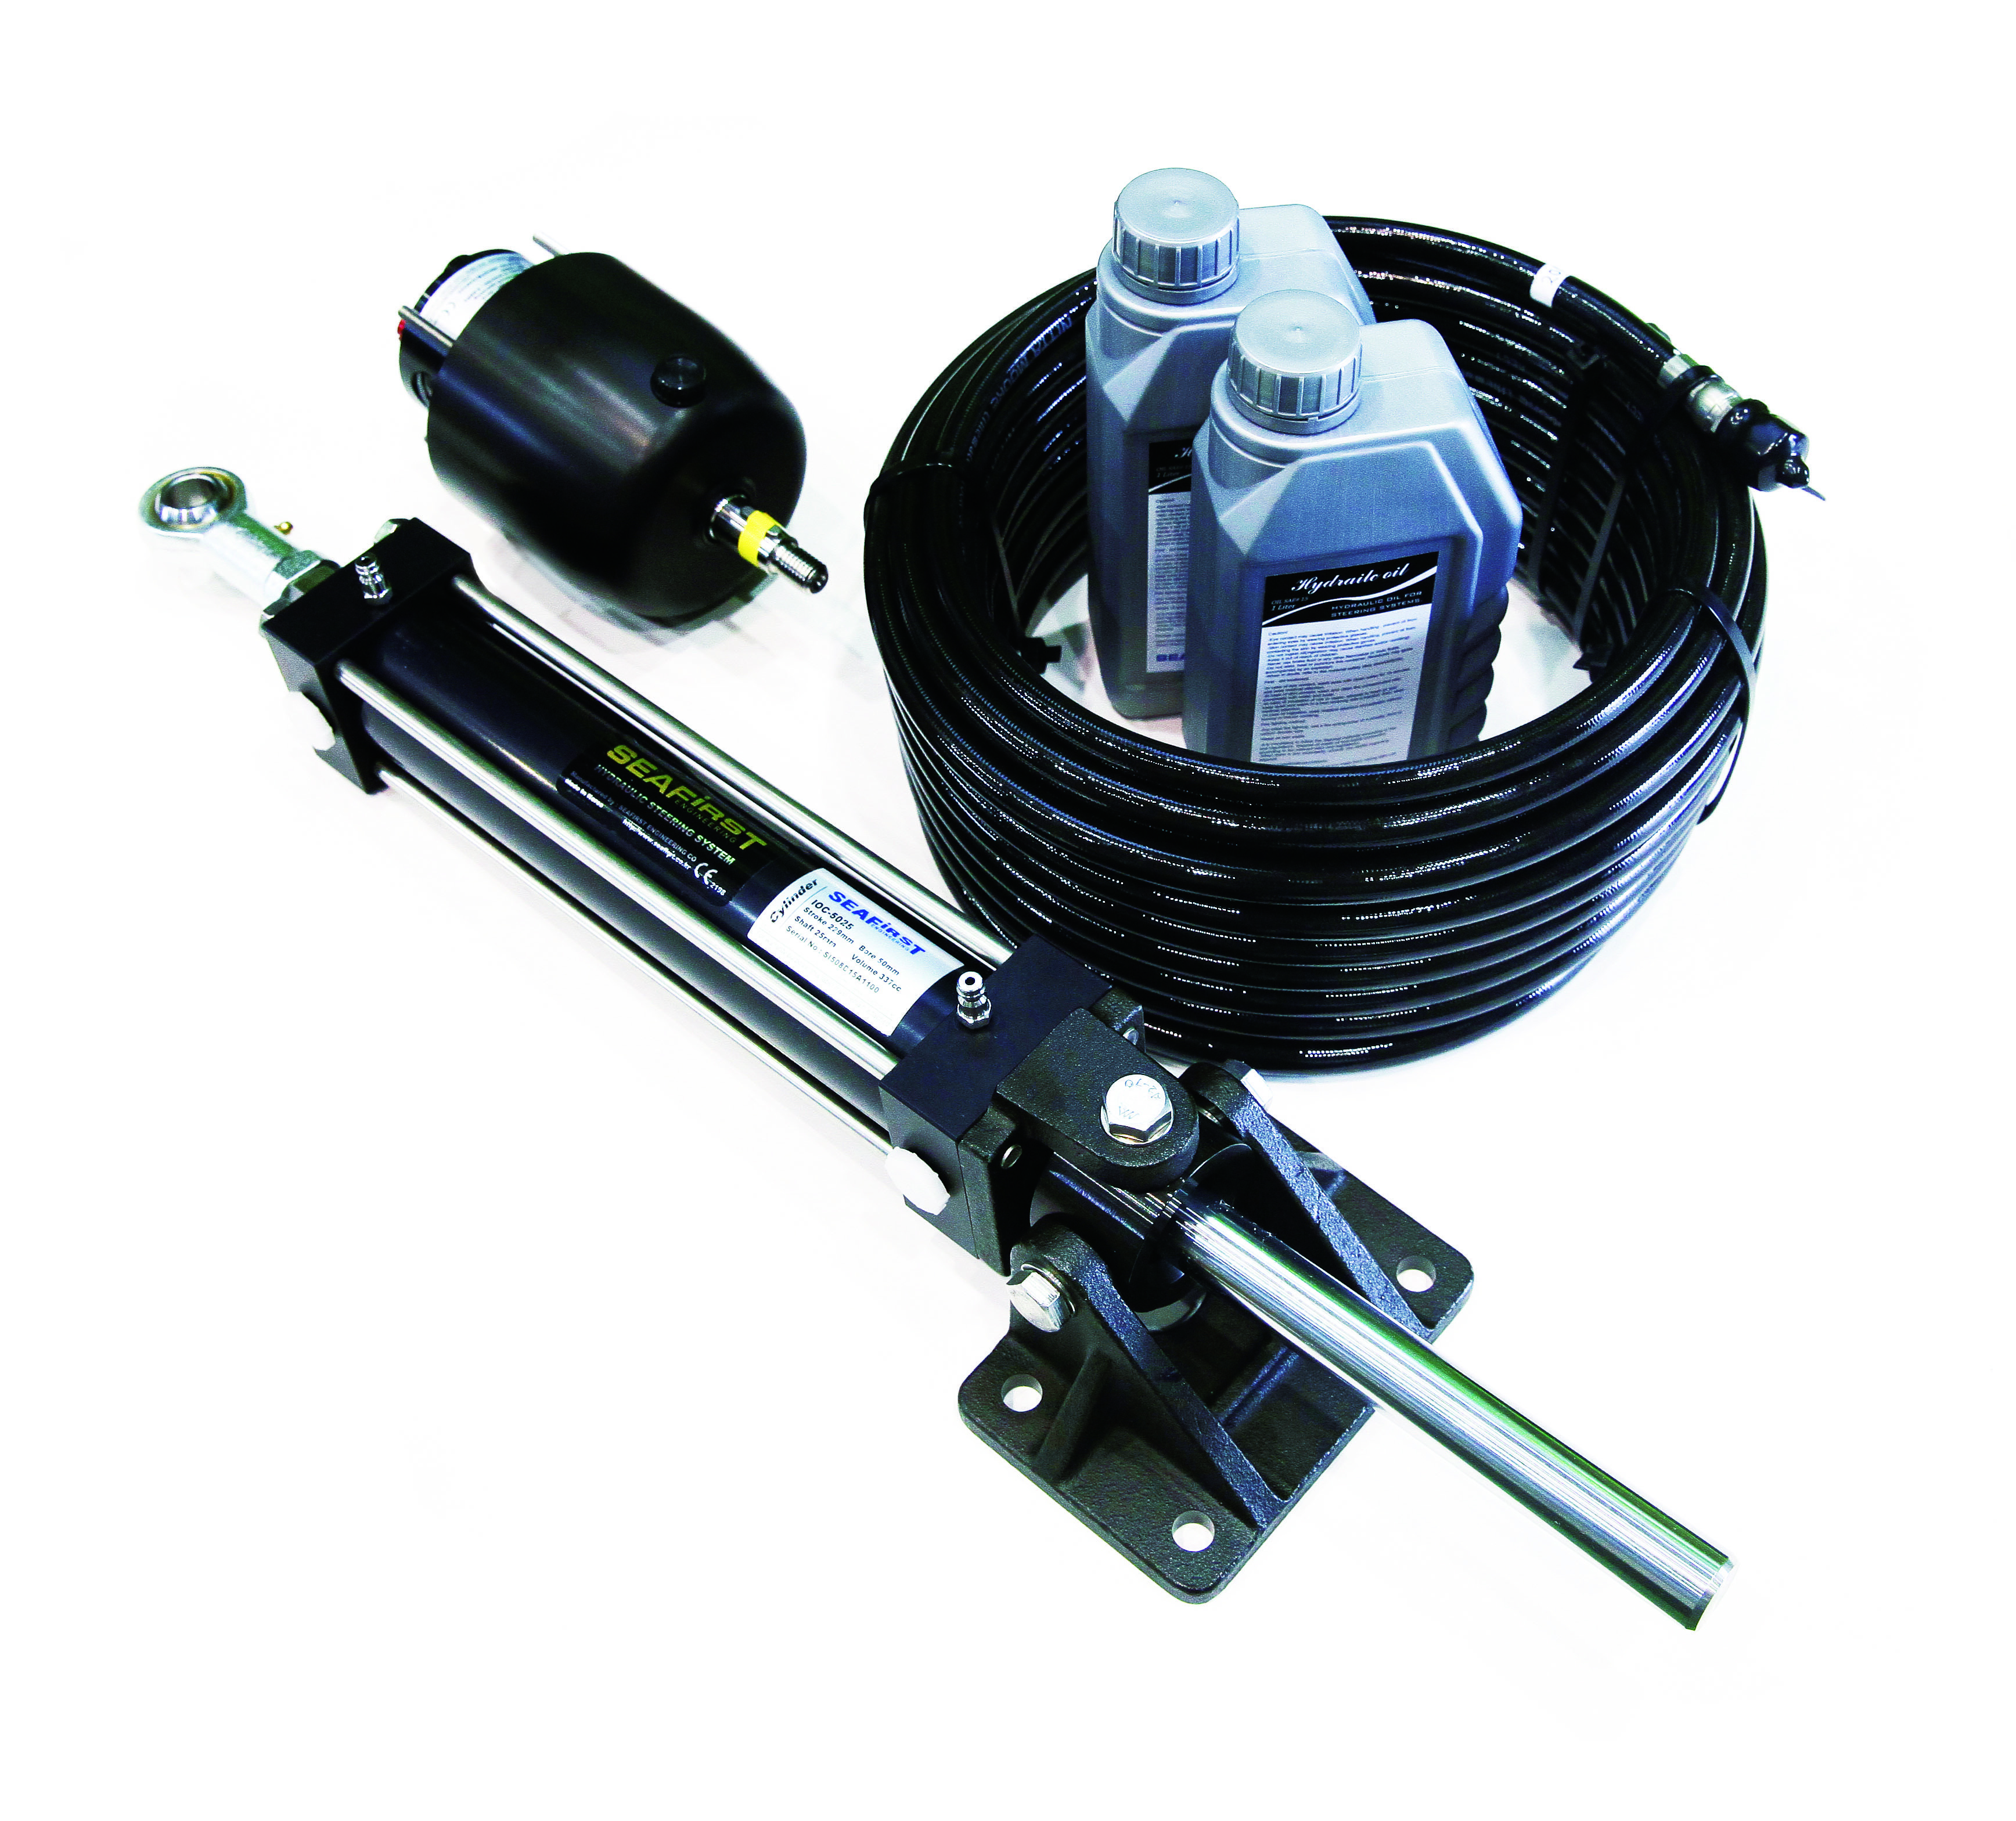 Hydraulic steering for outboard